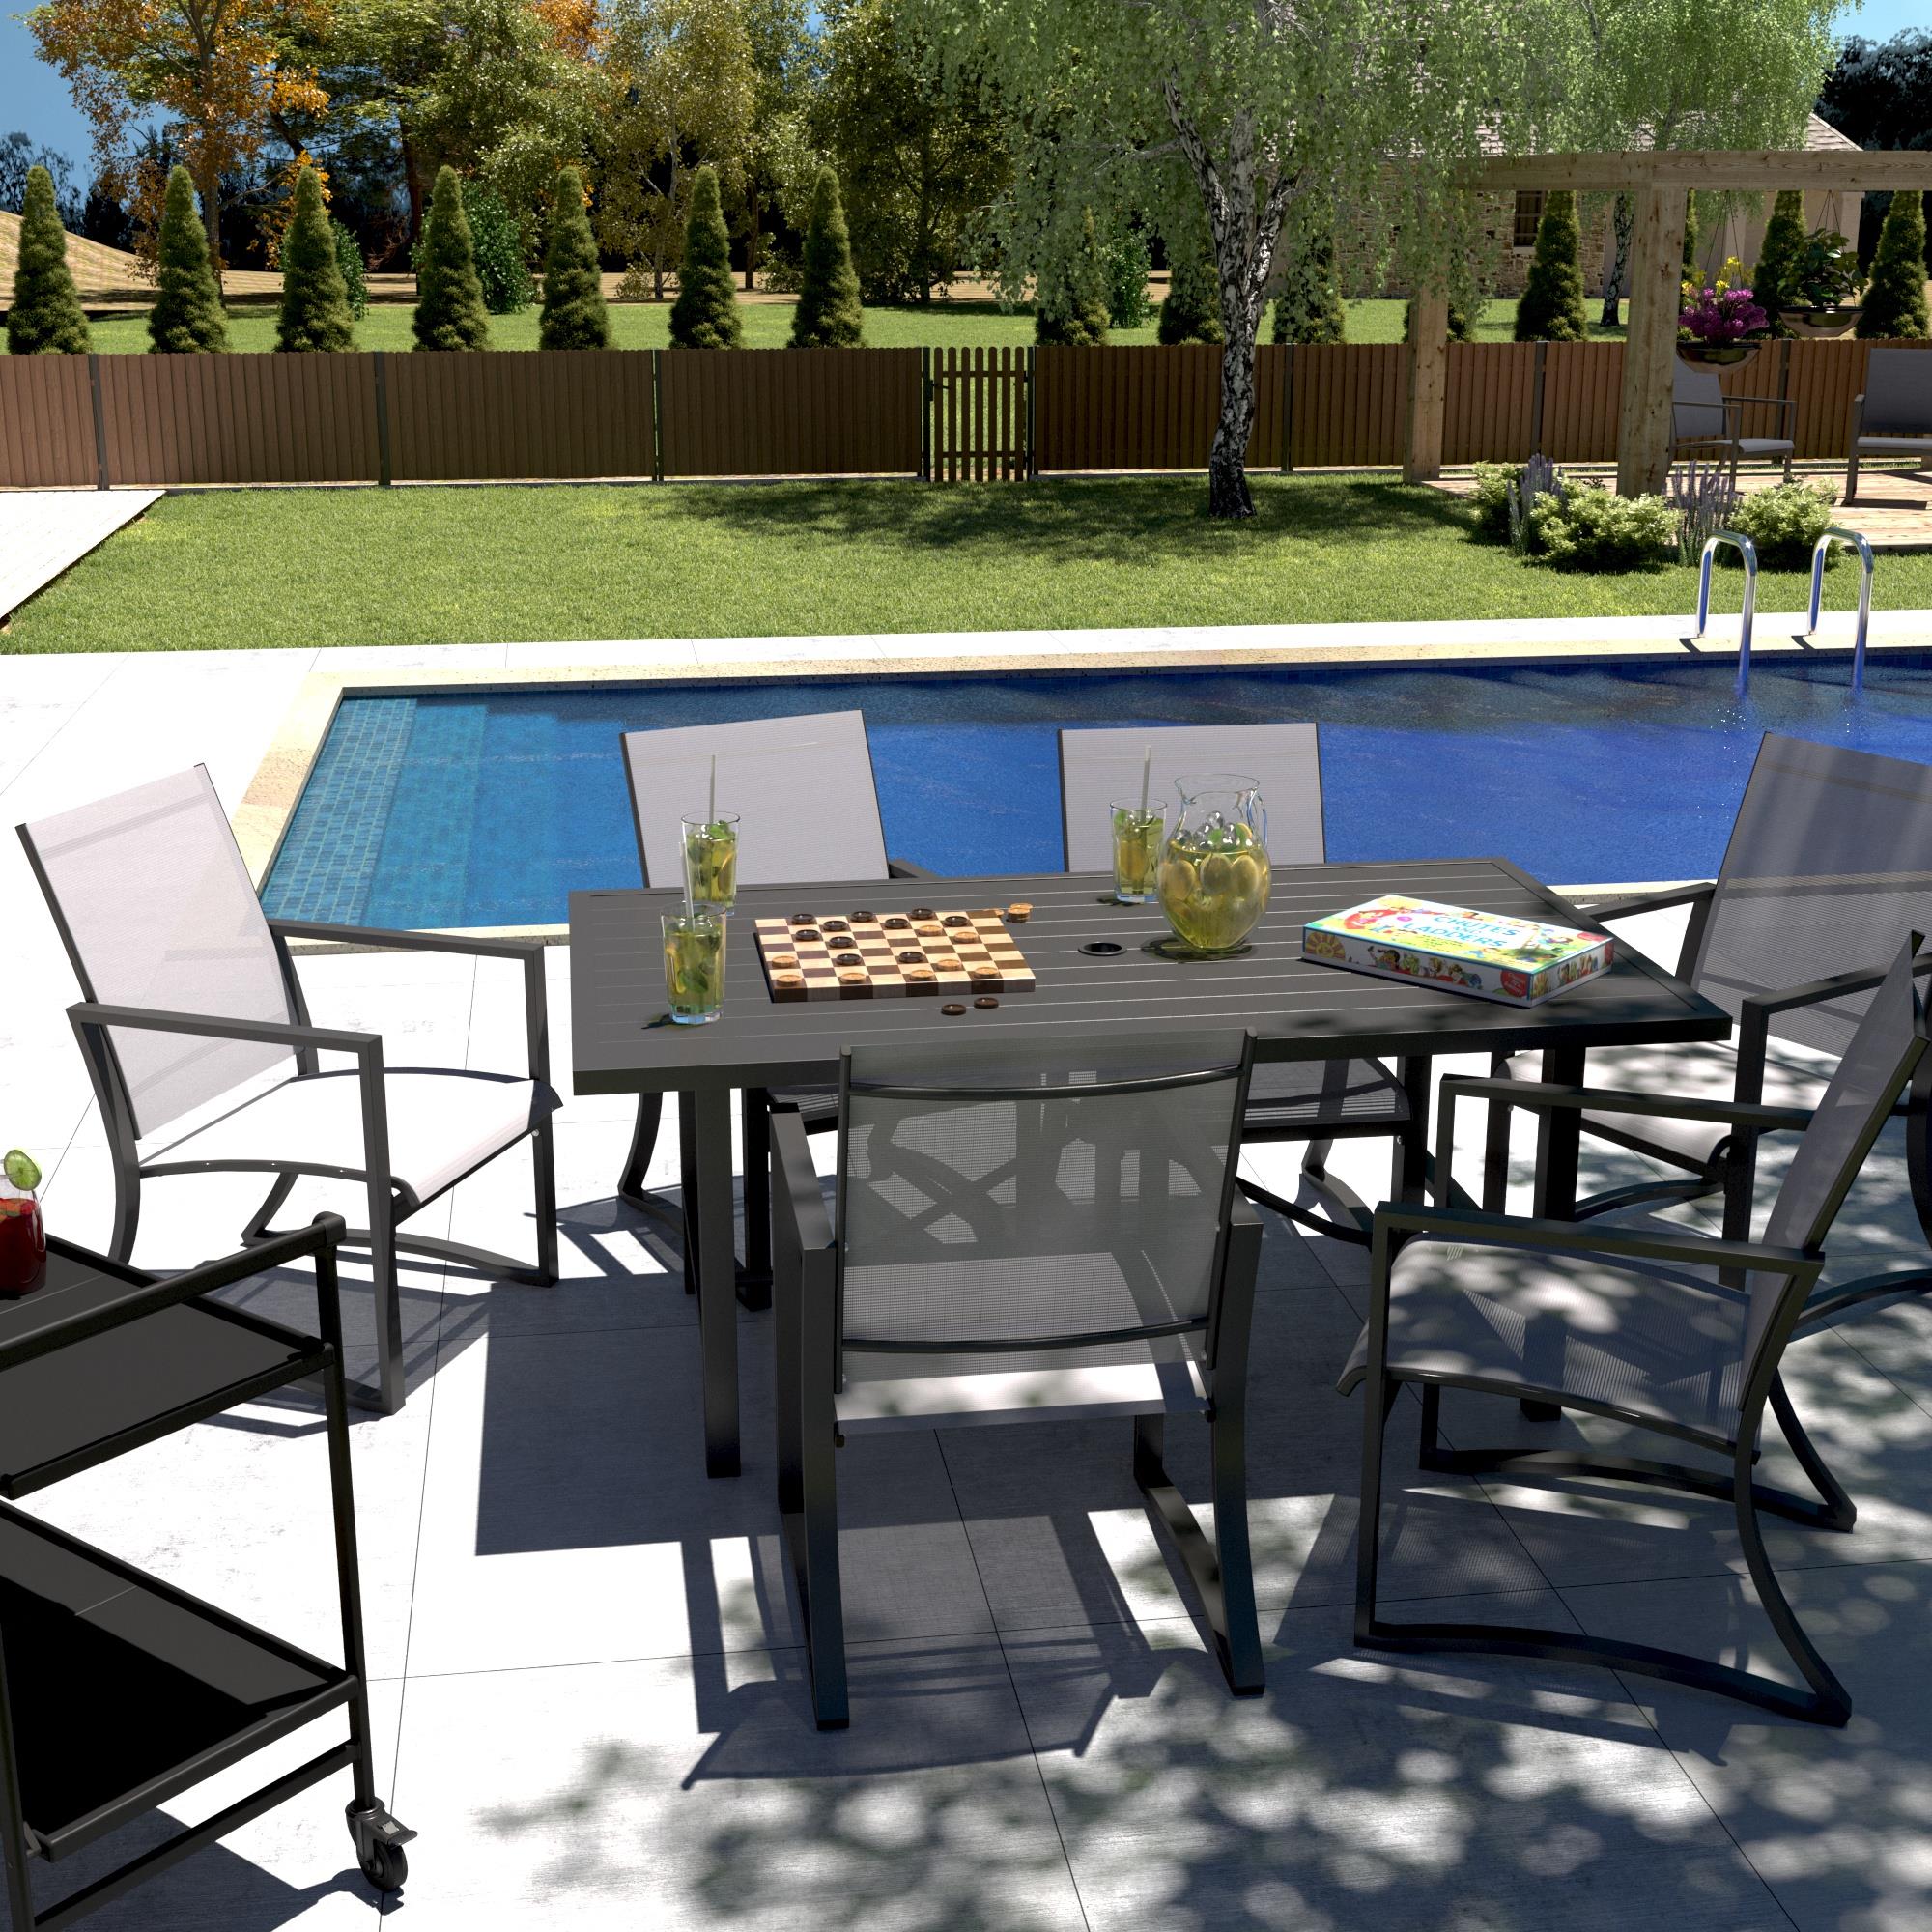 7 Piece Patio Dining Set - Charcoal - N/A